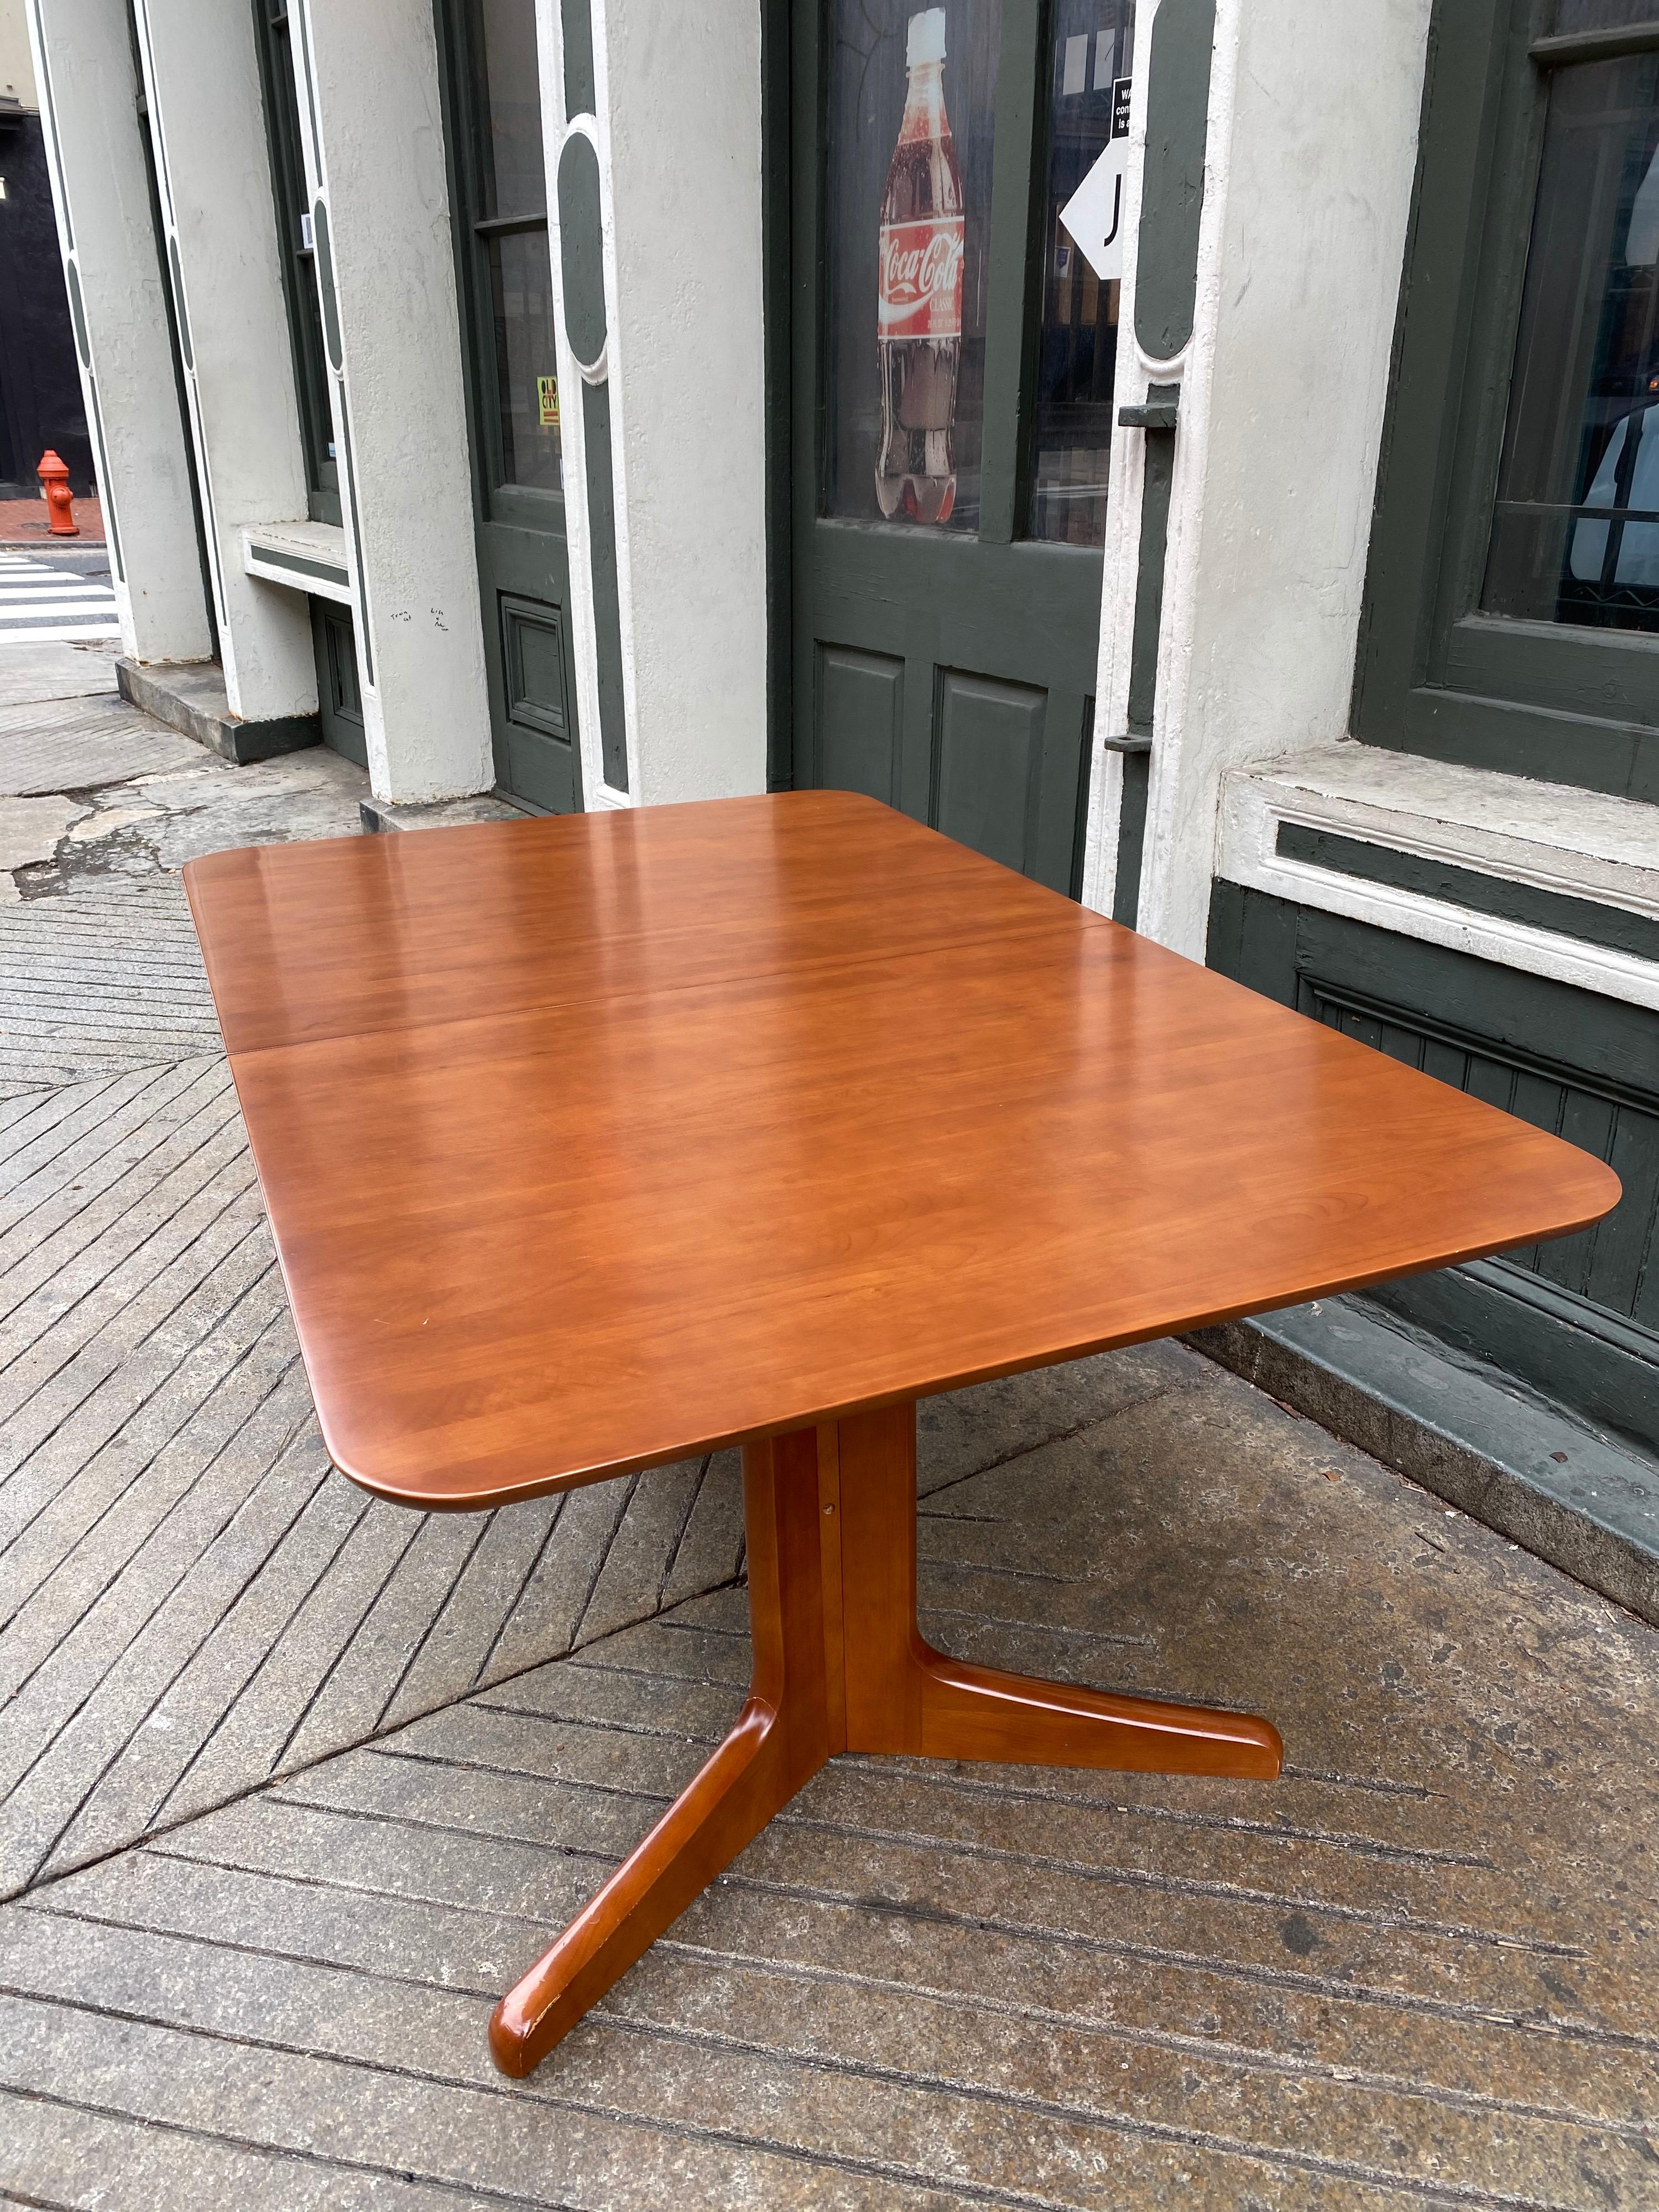 Dane decor dining table with a double pedestal design. Legs are connected with one long piece of wood. Self-storing single leaf pulls out easily. Table top has rounded corners. Color is between a cherry and teak color. One leaf measure 19.5 deep.